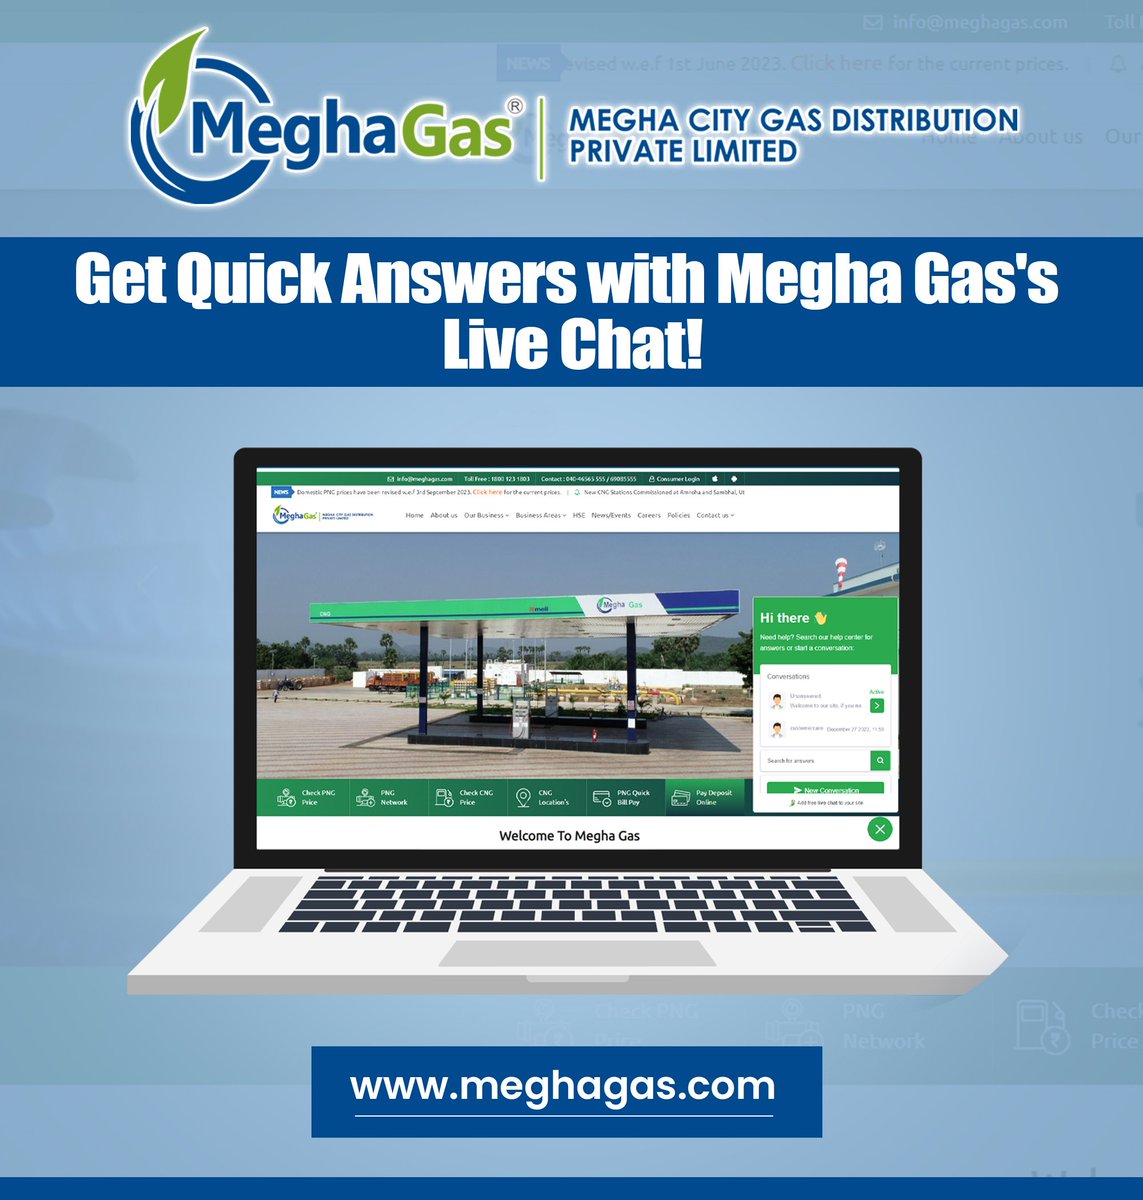 Have a question about our services? Need assistance with your account? Want to learn more about our products? No problem – our #MeghaGas representatives are here to help with a 24/7 #LiveChat feature. We prioritize your convenience & satisfaction.
#NaturalGas #MCGDPL #MEIL